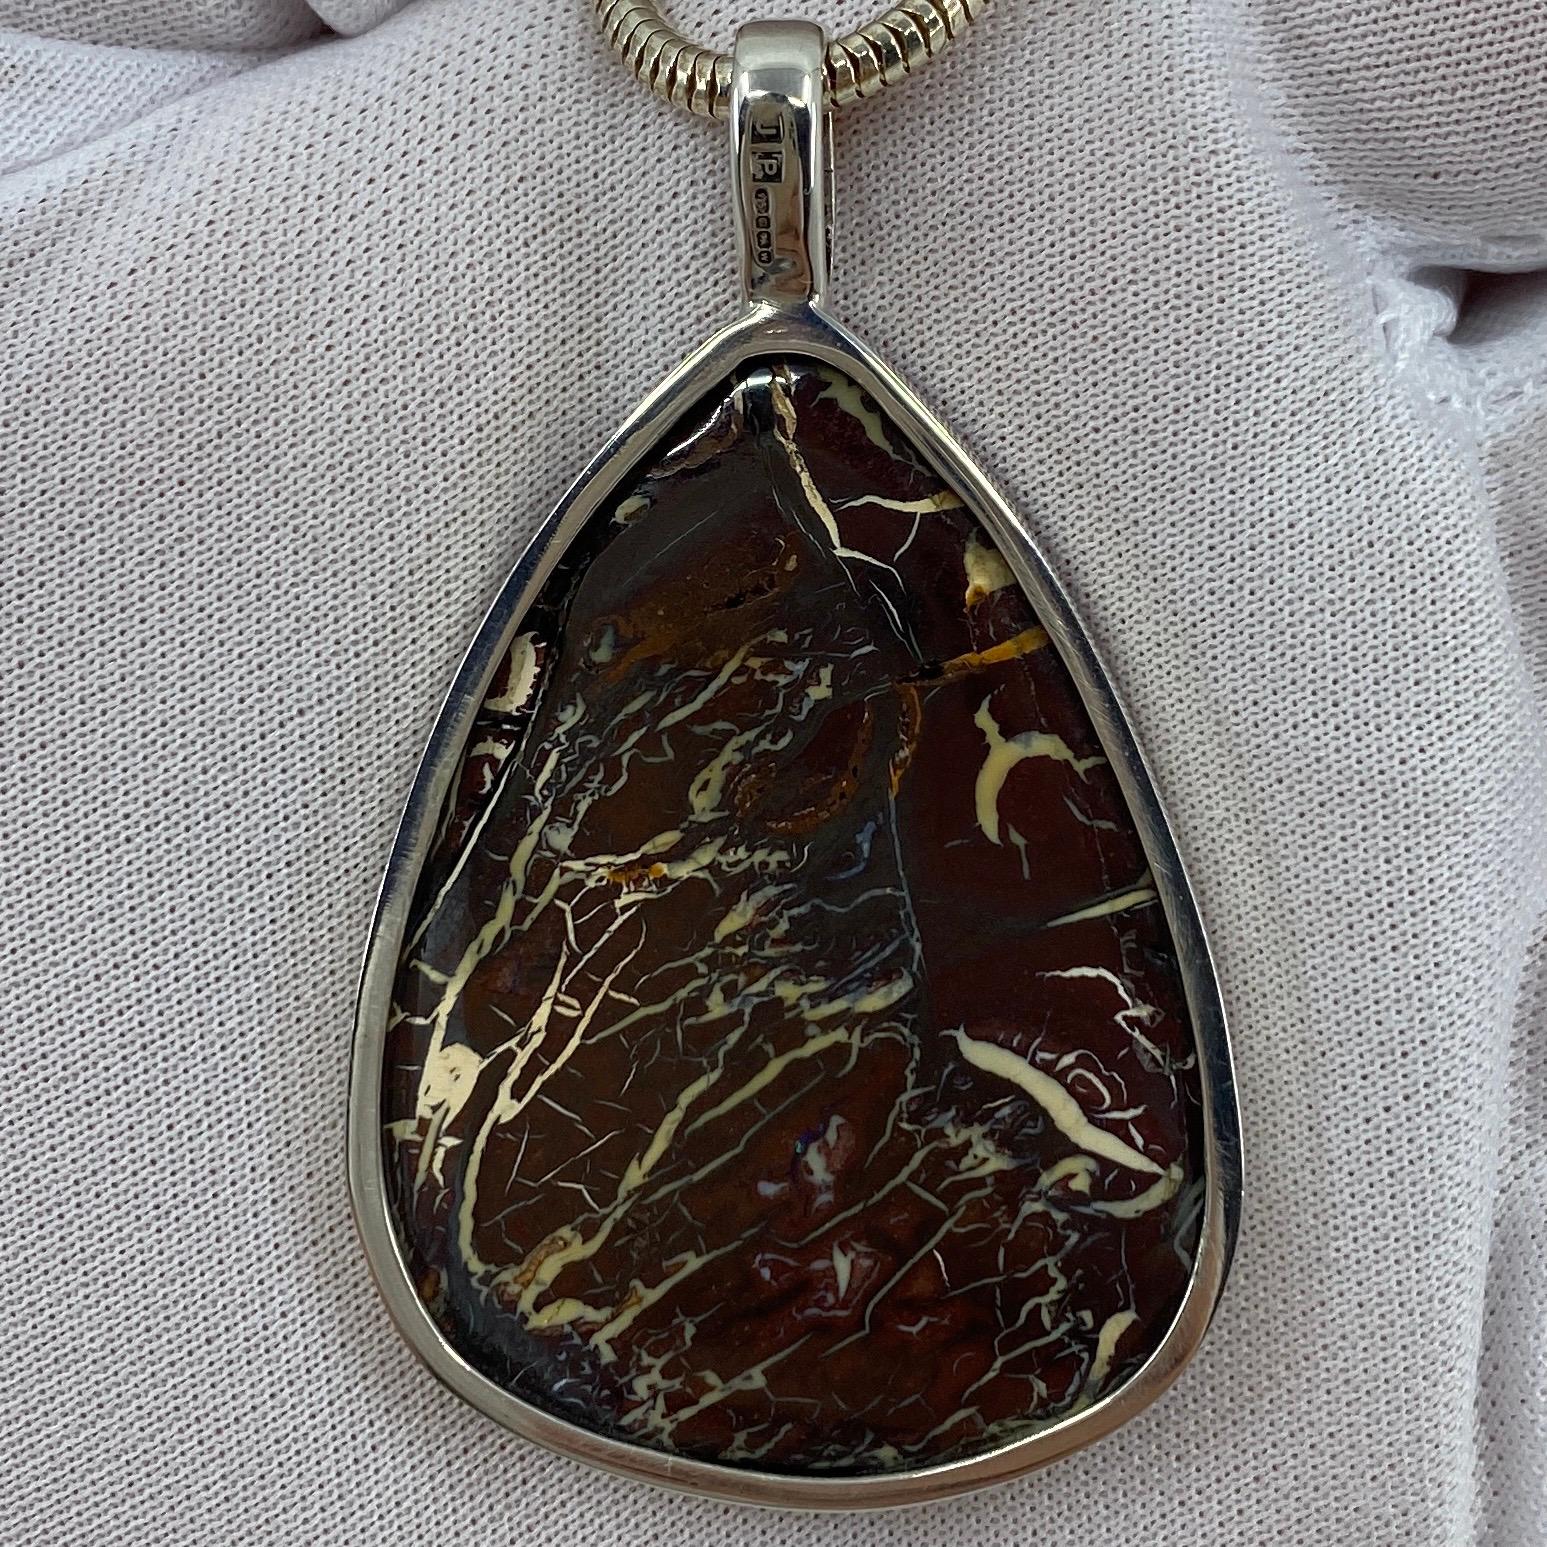 Fine Handmade Large Natural Boulder Opal Pendant Necklace.

Large beautiful natural boulder opal pendant weighing 18.3g. Handmade in sterling silver.

Hanging on an 24' snake chain.

A unique piece.

The pendant is brand new and never